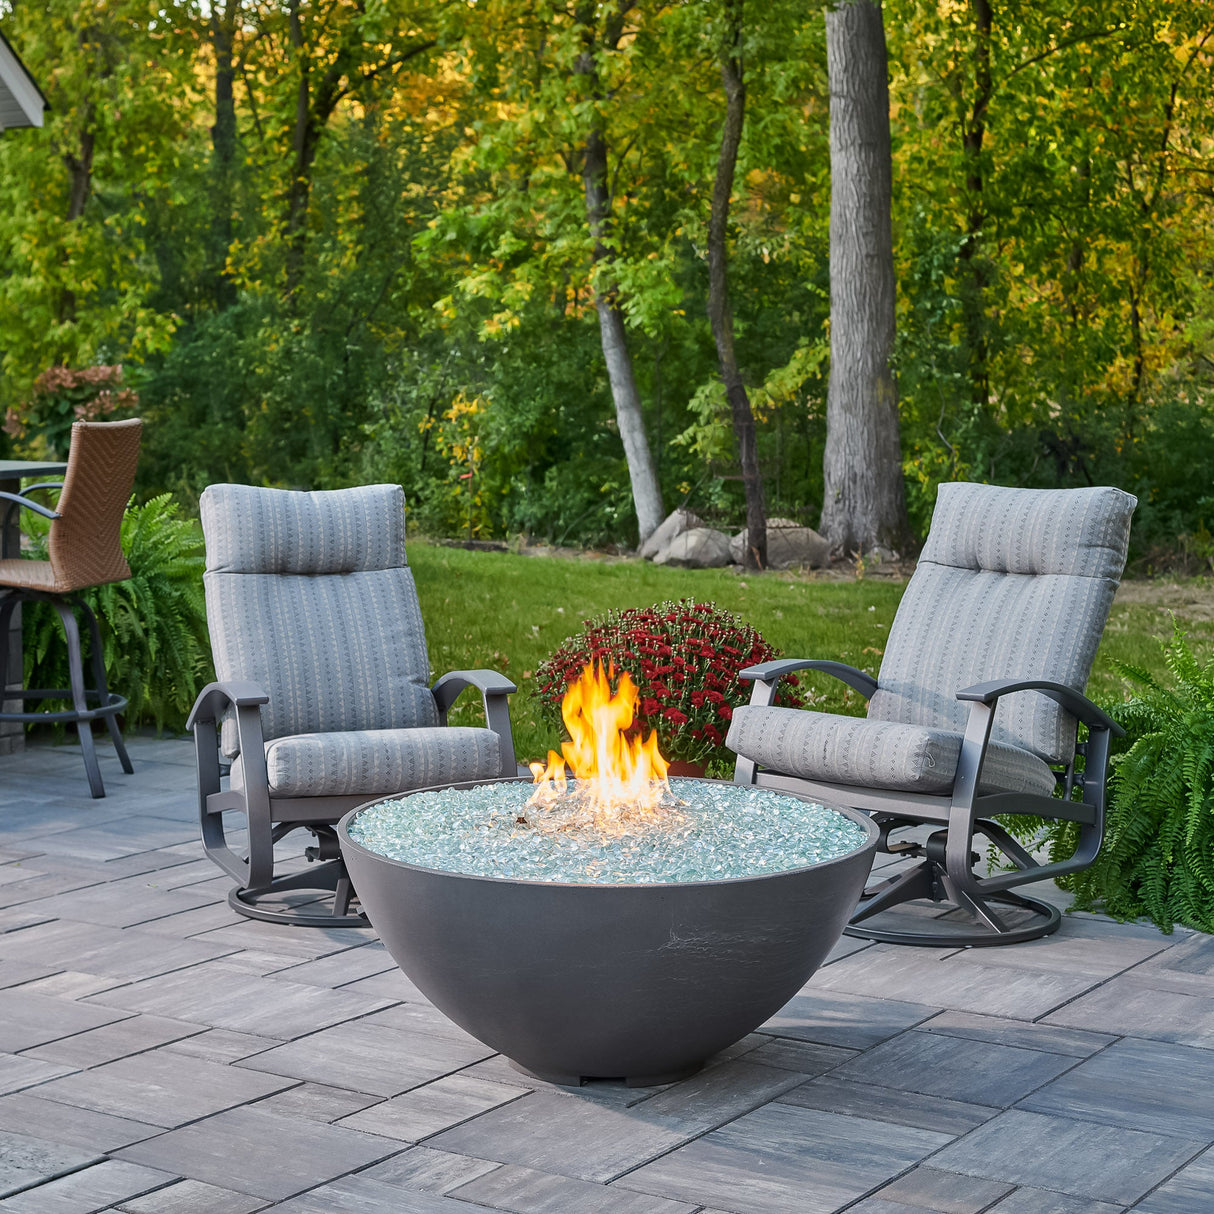 A Midnight Mist Cove Edge Round Gas Fire Pit Bowl 42" with a large flame and surrounded by patio furniture